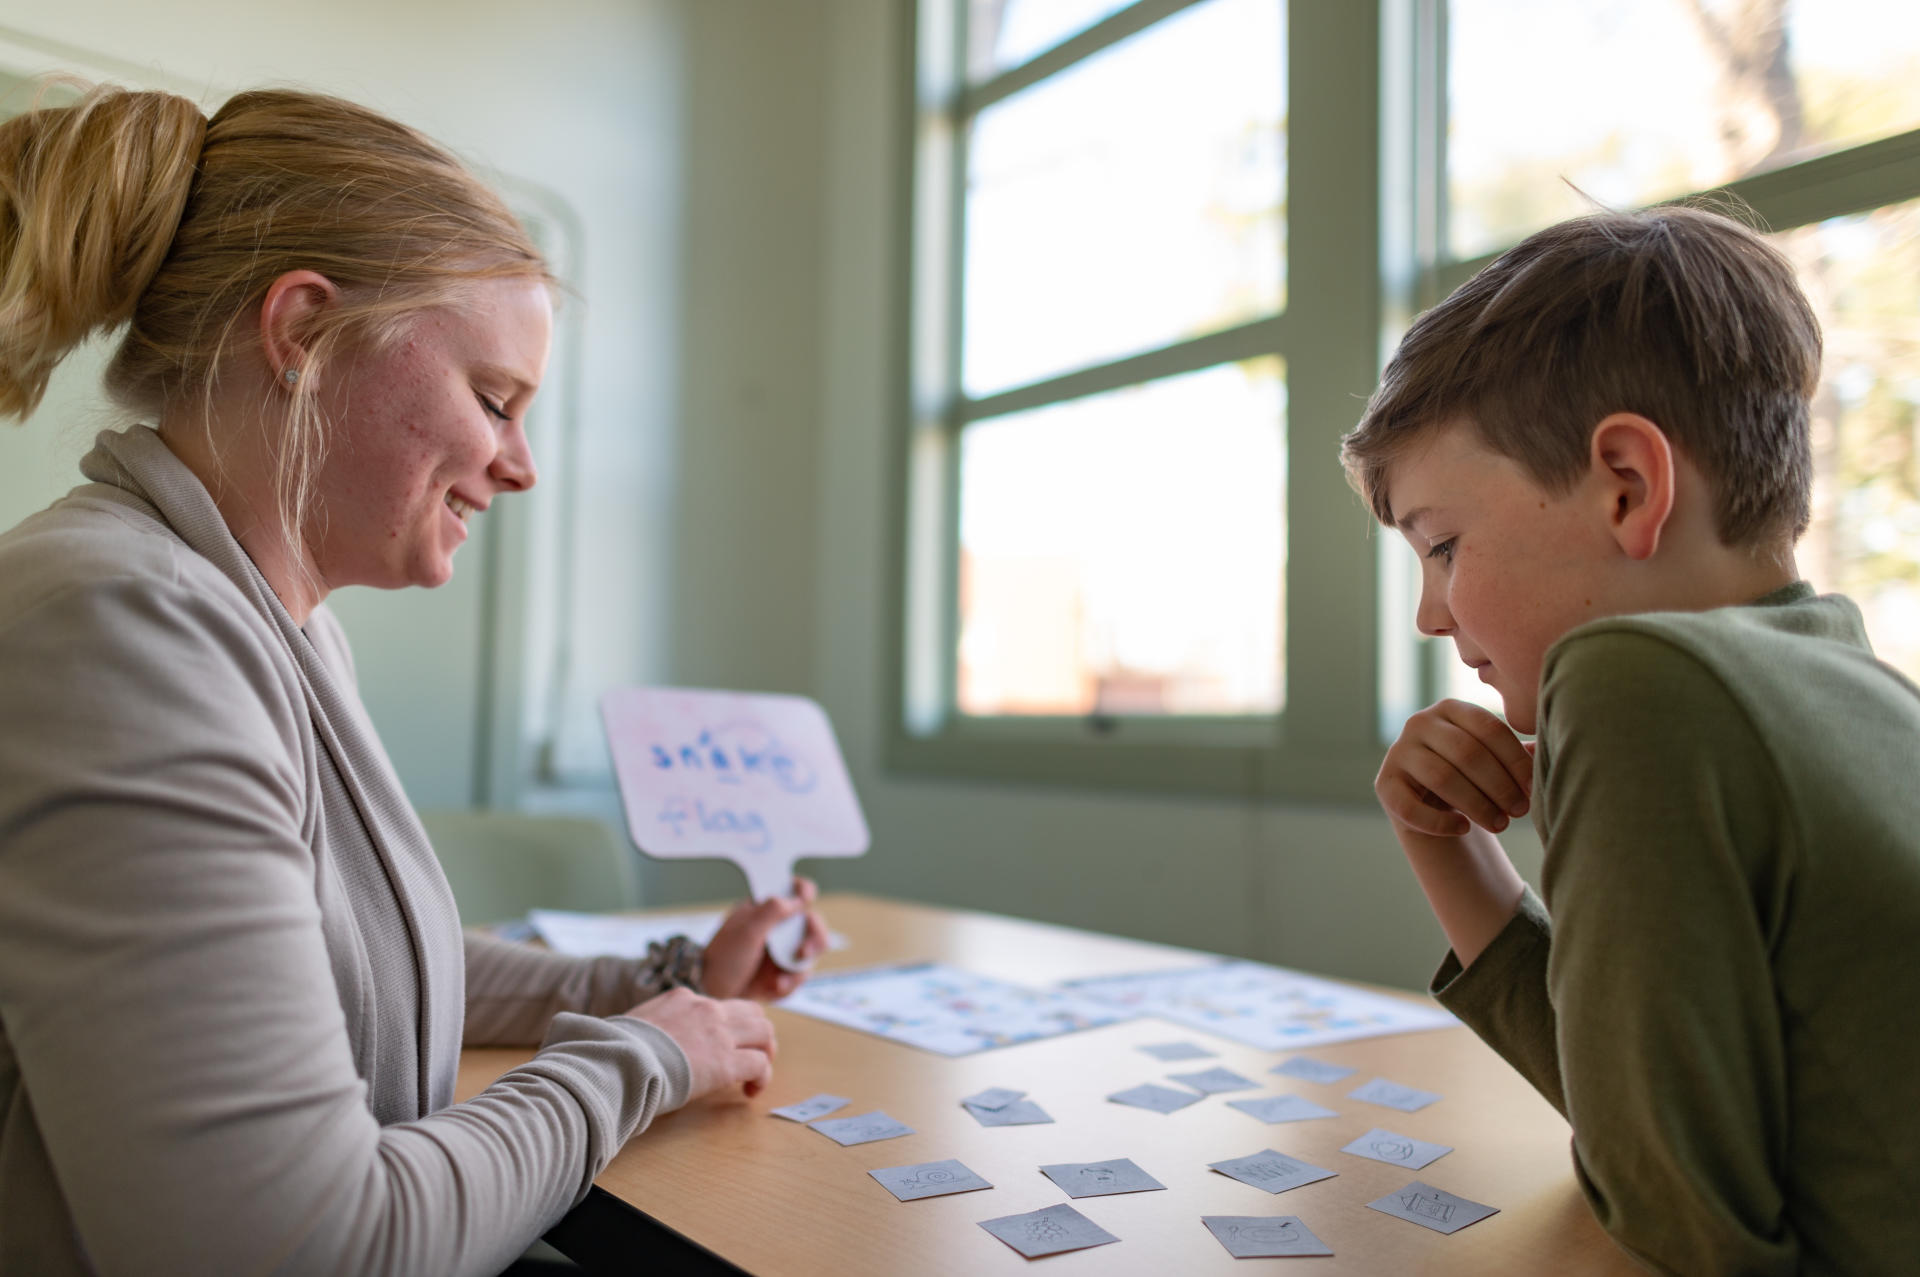 Alyssa DeVries (left) and Liam McCoy (right) work on an exercise during a Communication for Disorders (CCD) counseling session on at Chico State.